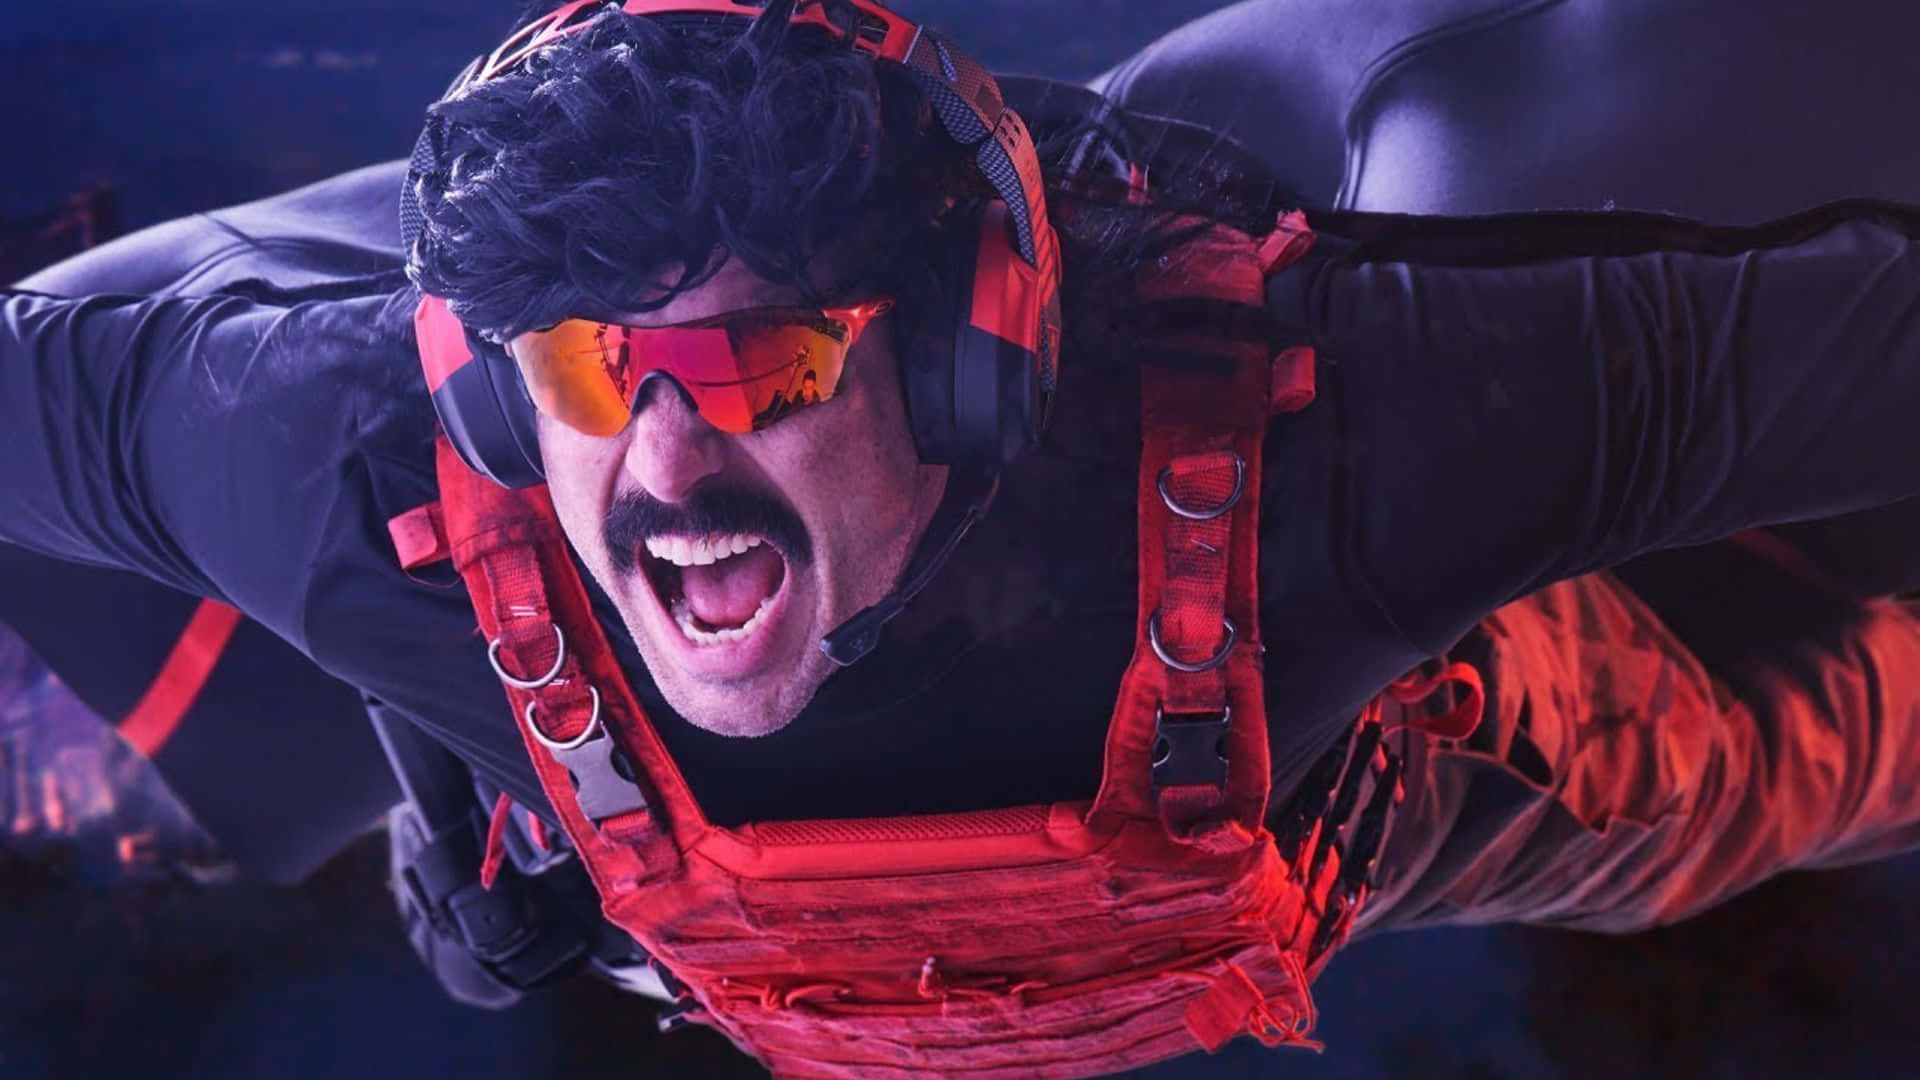 "Dr Disrespect is Ready to Dominate!" Wallpaper